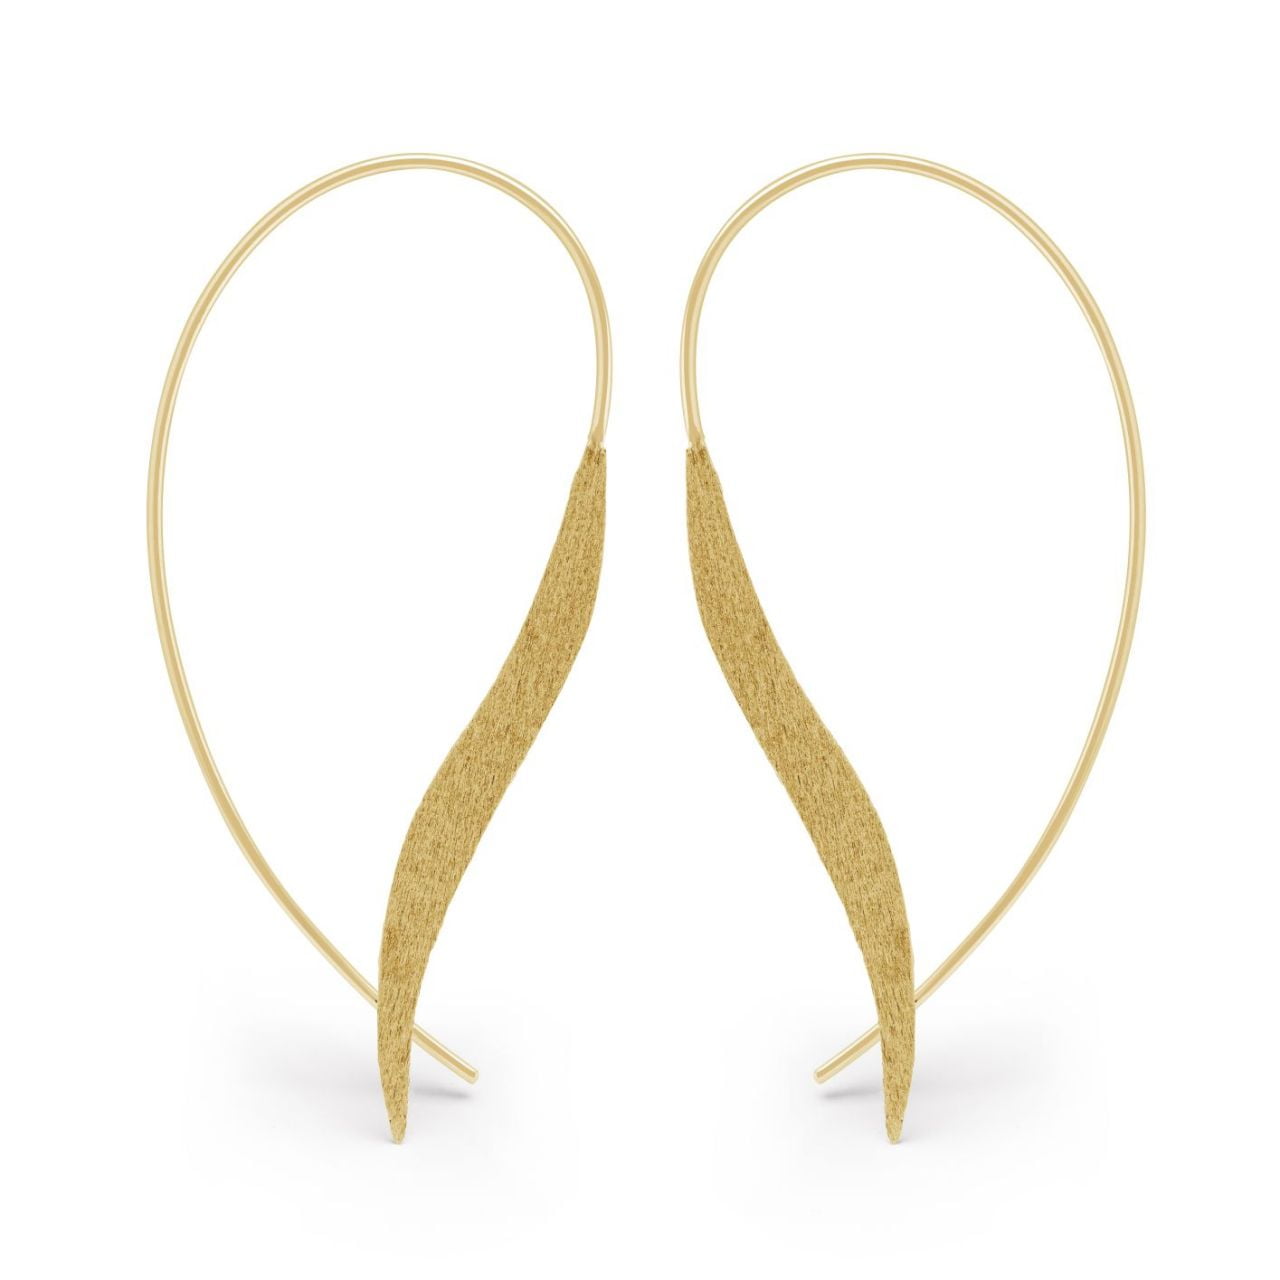 Bastian Inverun Gold Plated Sterling Silver Pull Through Earrings